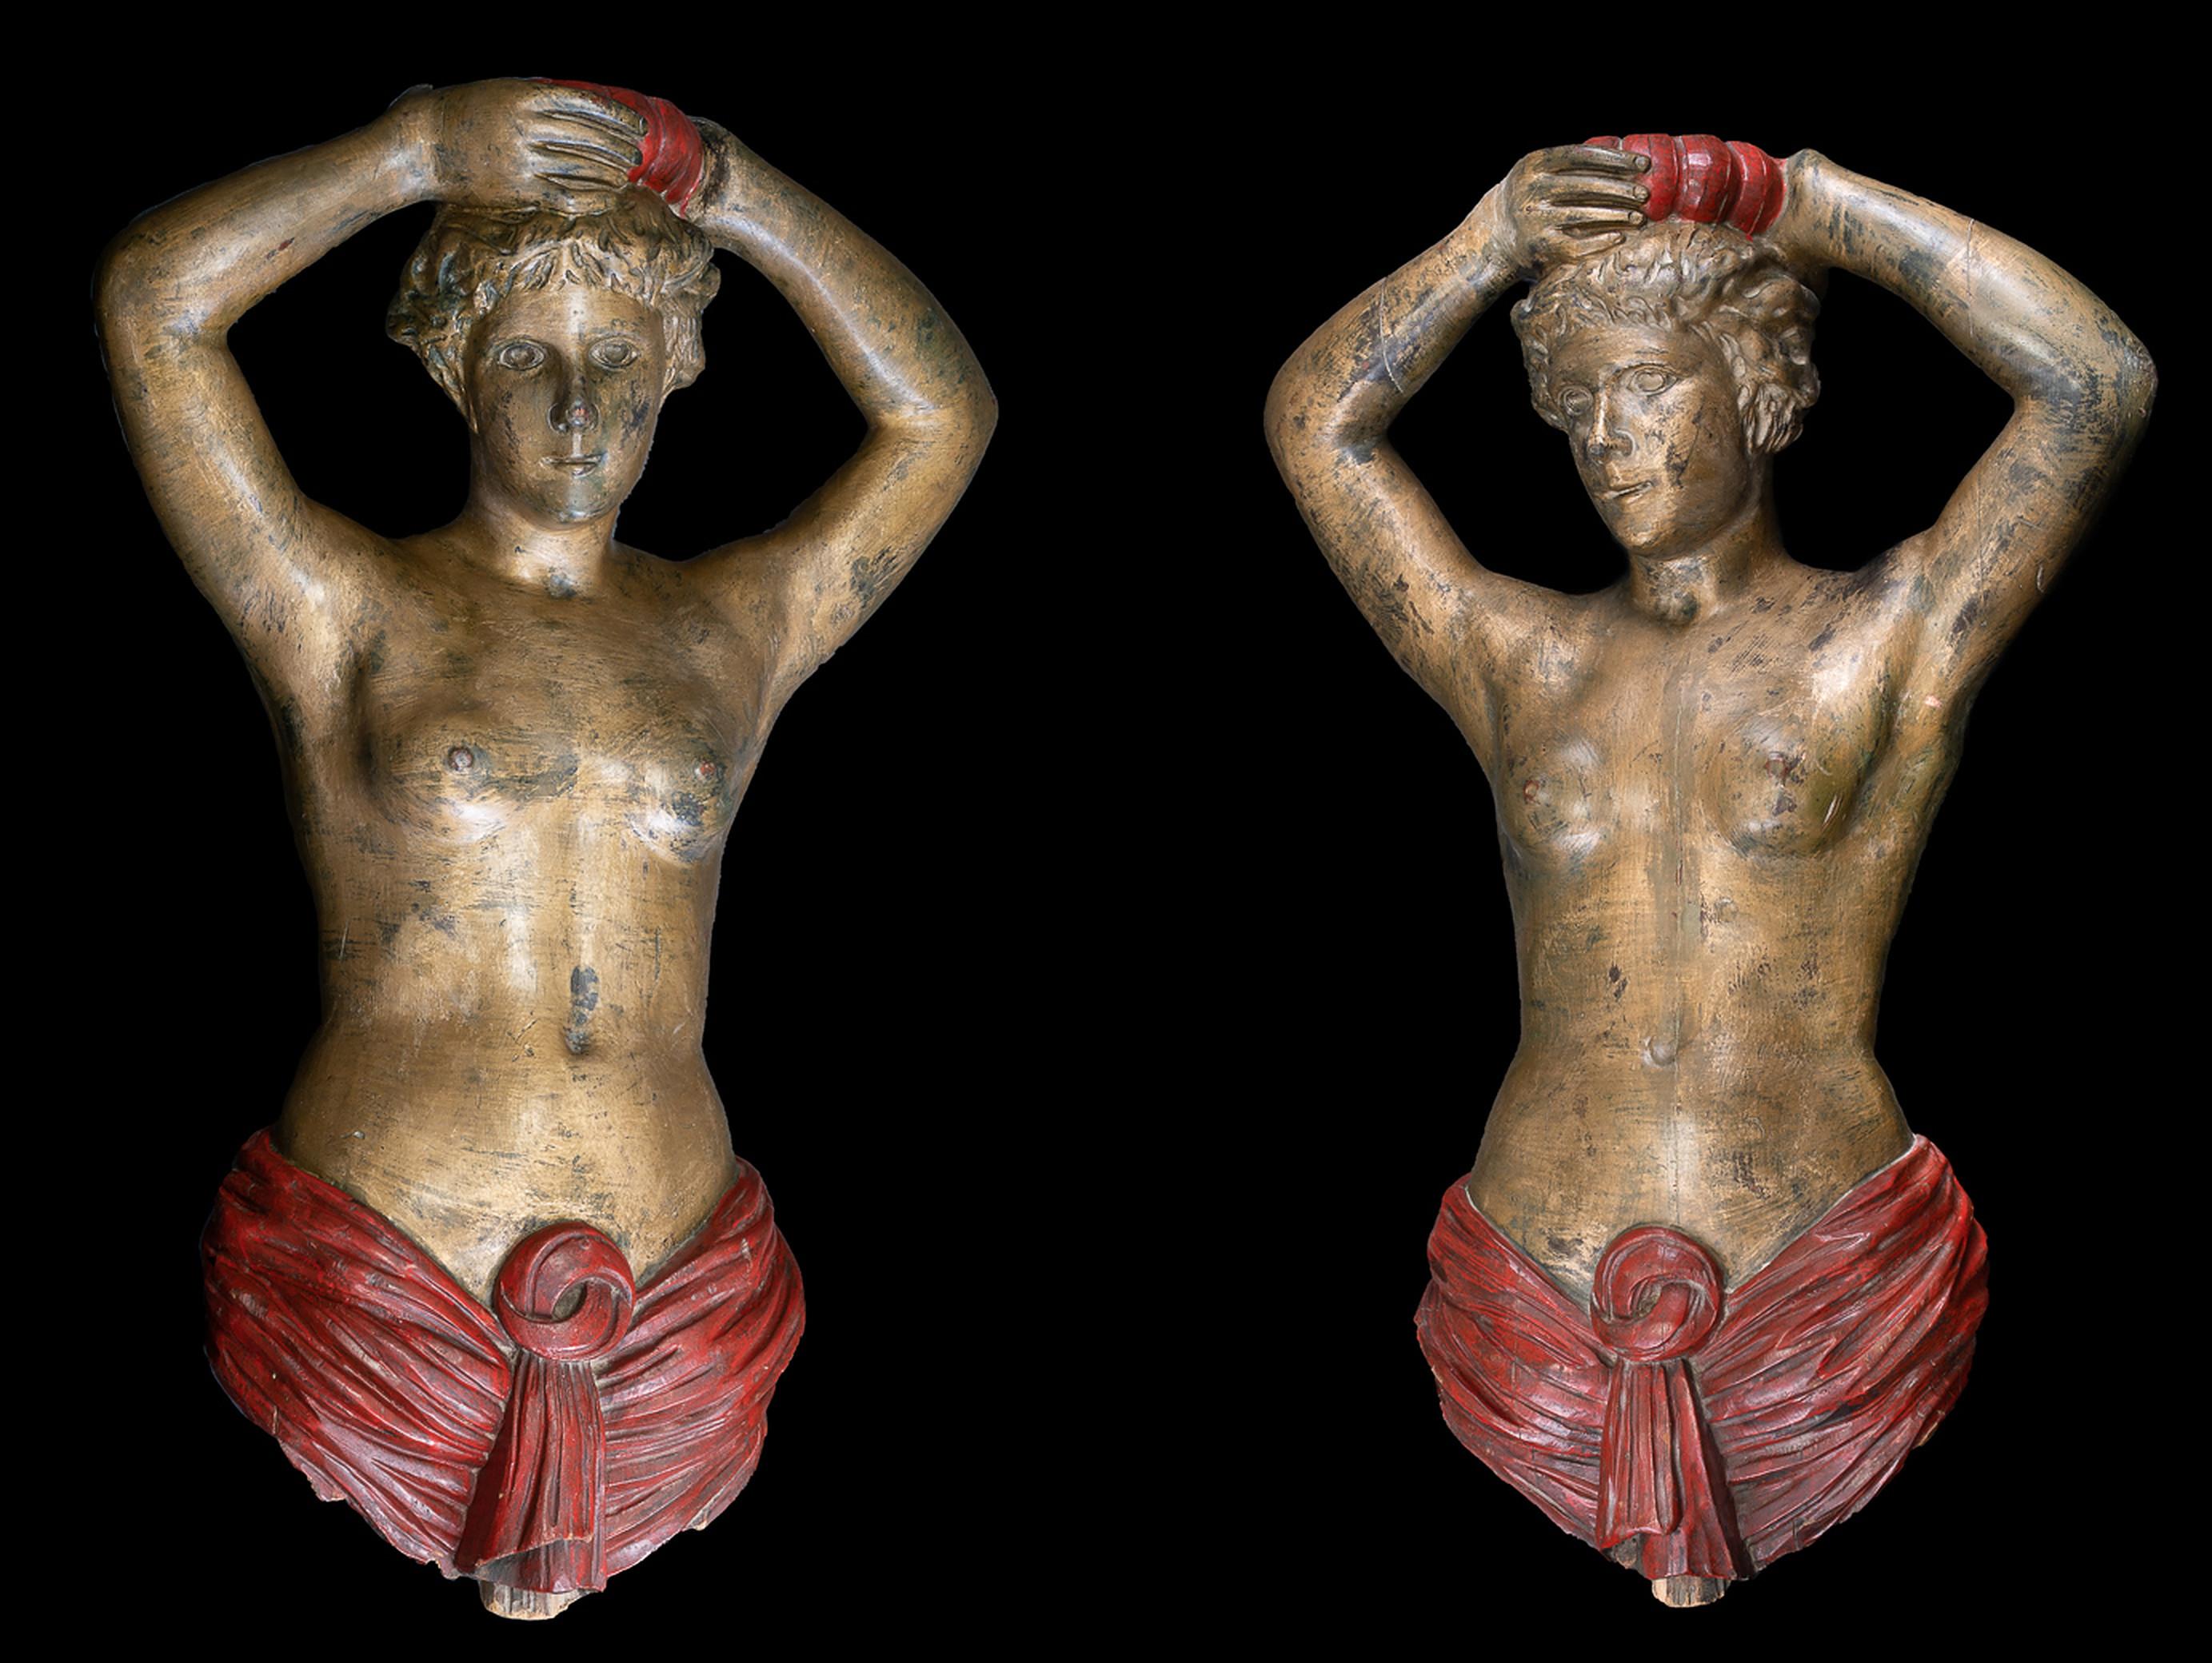 This pair of female torsos presumably decorated a fair stand or an organ in a theme park. Most likely, they were part of an immense organ that was intended to entertain the people with its impressive sound. A fairground 80-keyless organ with similar